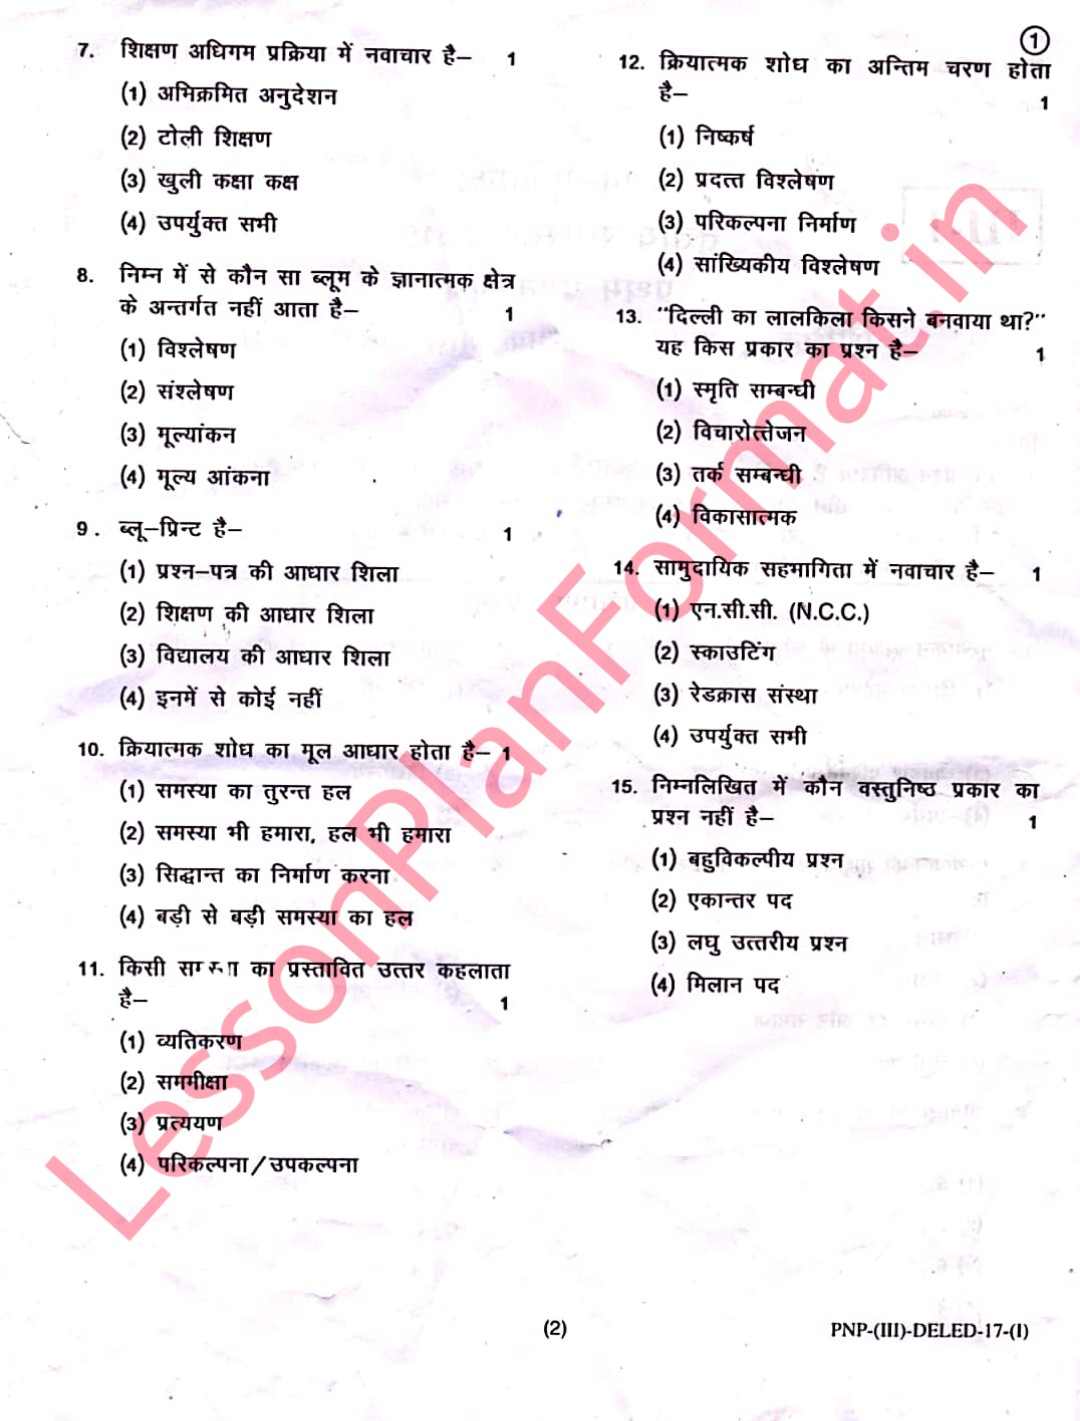 Deled 3rd Semester Previous Question Paper 2019